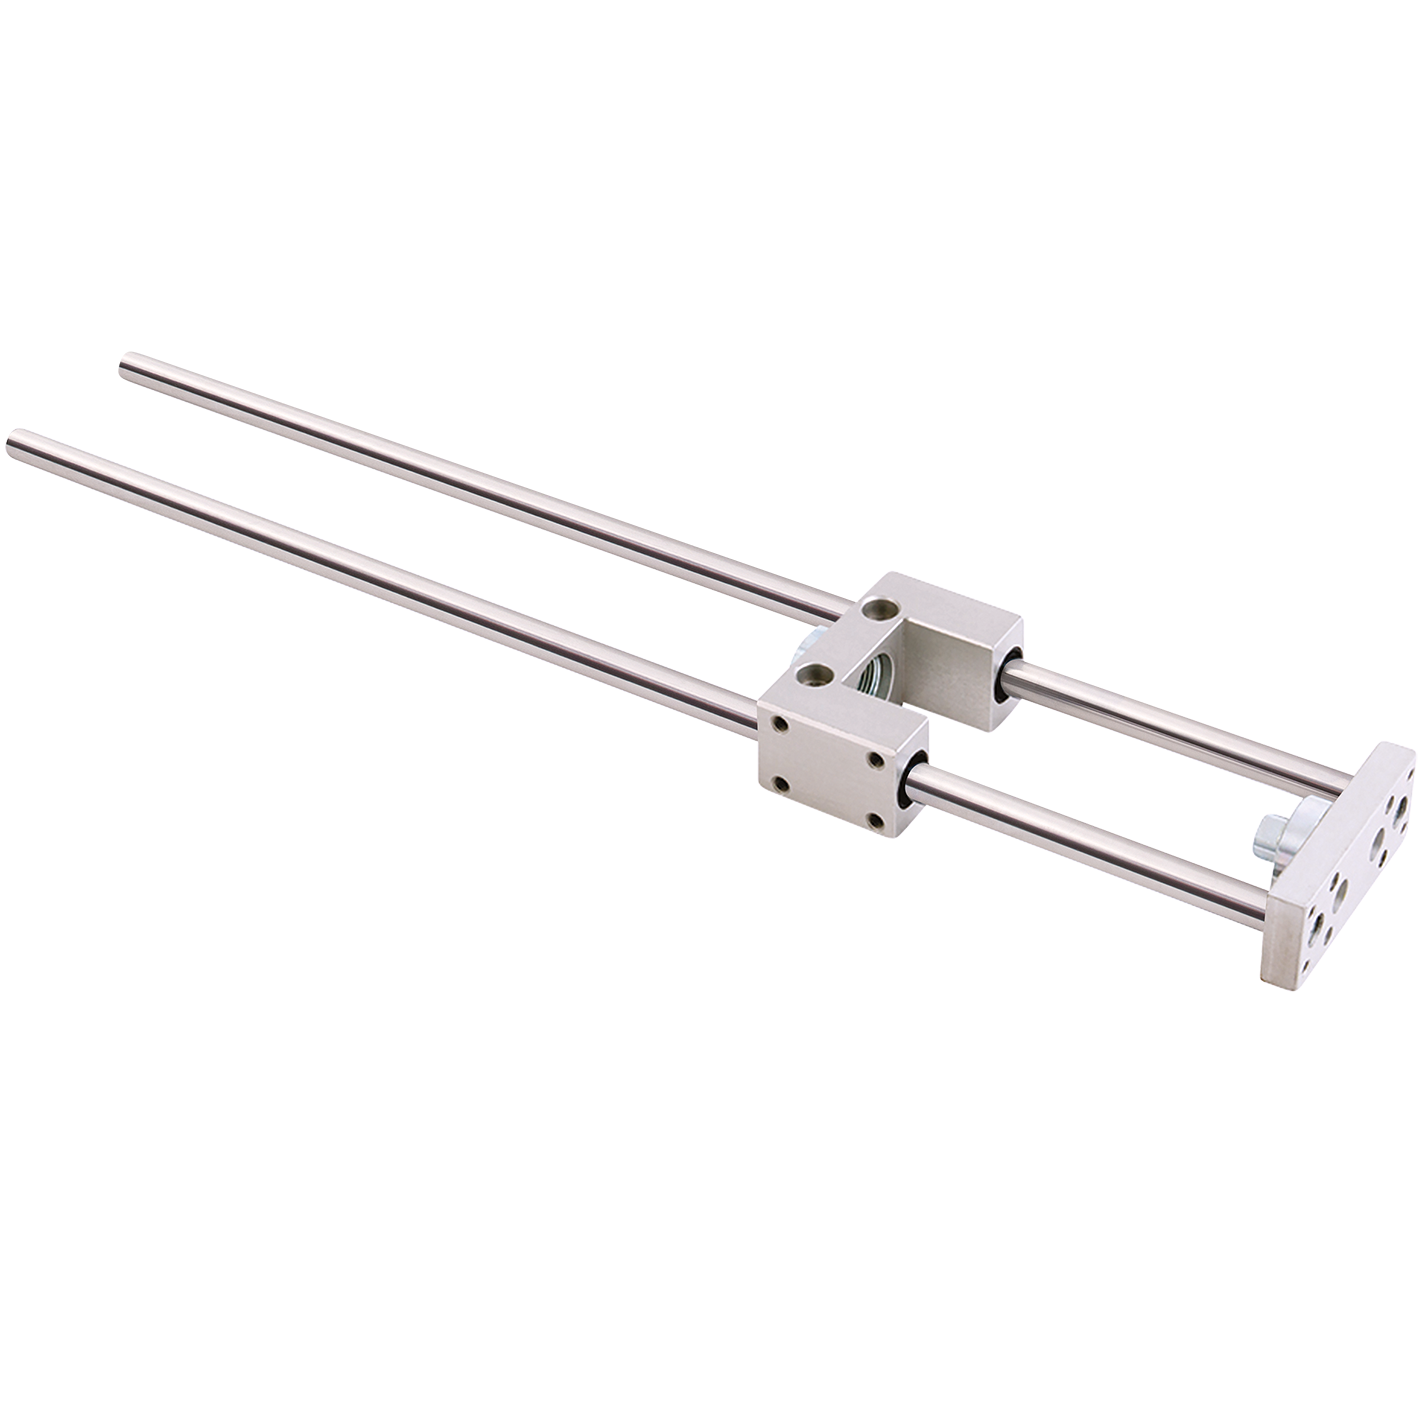 50mm Bore x 200mm Stroke Cylinder Guide Unit